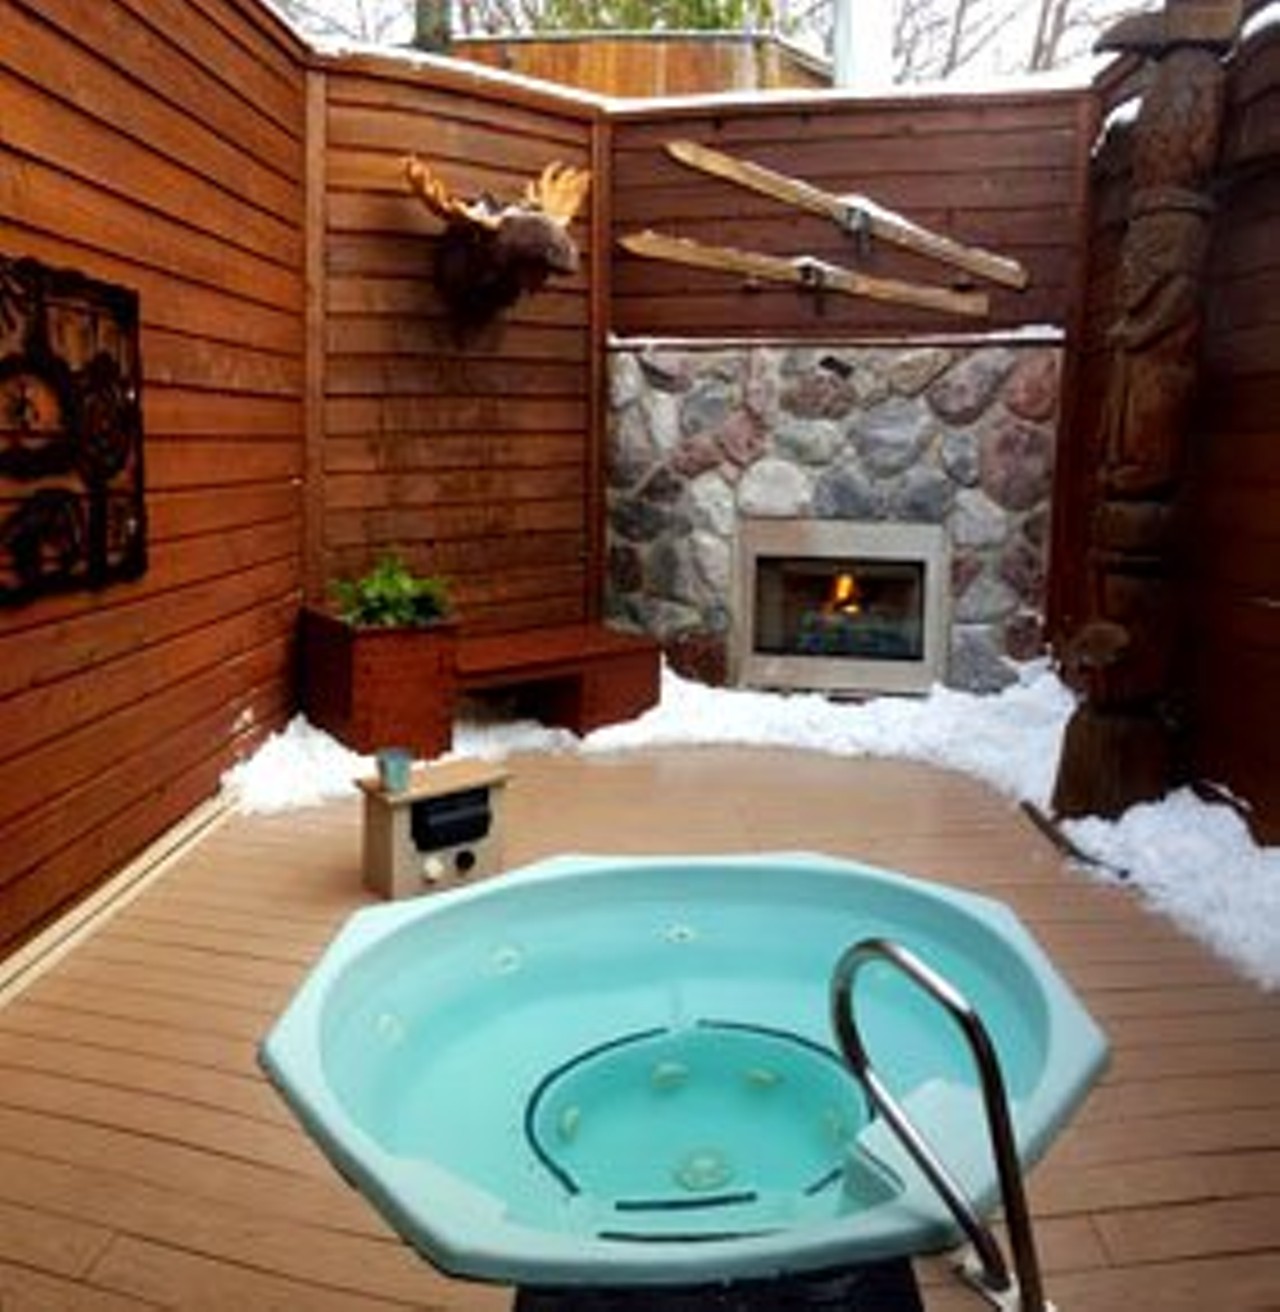 Oasis Hot Tub Gardens - 2301 S. State, Ann Arbor  734-663-9001 - 
Slip out of the cold and into the luxurious comfort of 102 degree water in a private hot tub room at Oasis Hot Tub Gardens where visitors can choose to soak in indoor or outdoor tubs decorated in themes ranging from tropical islands to rustic lodges.